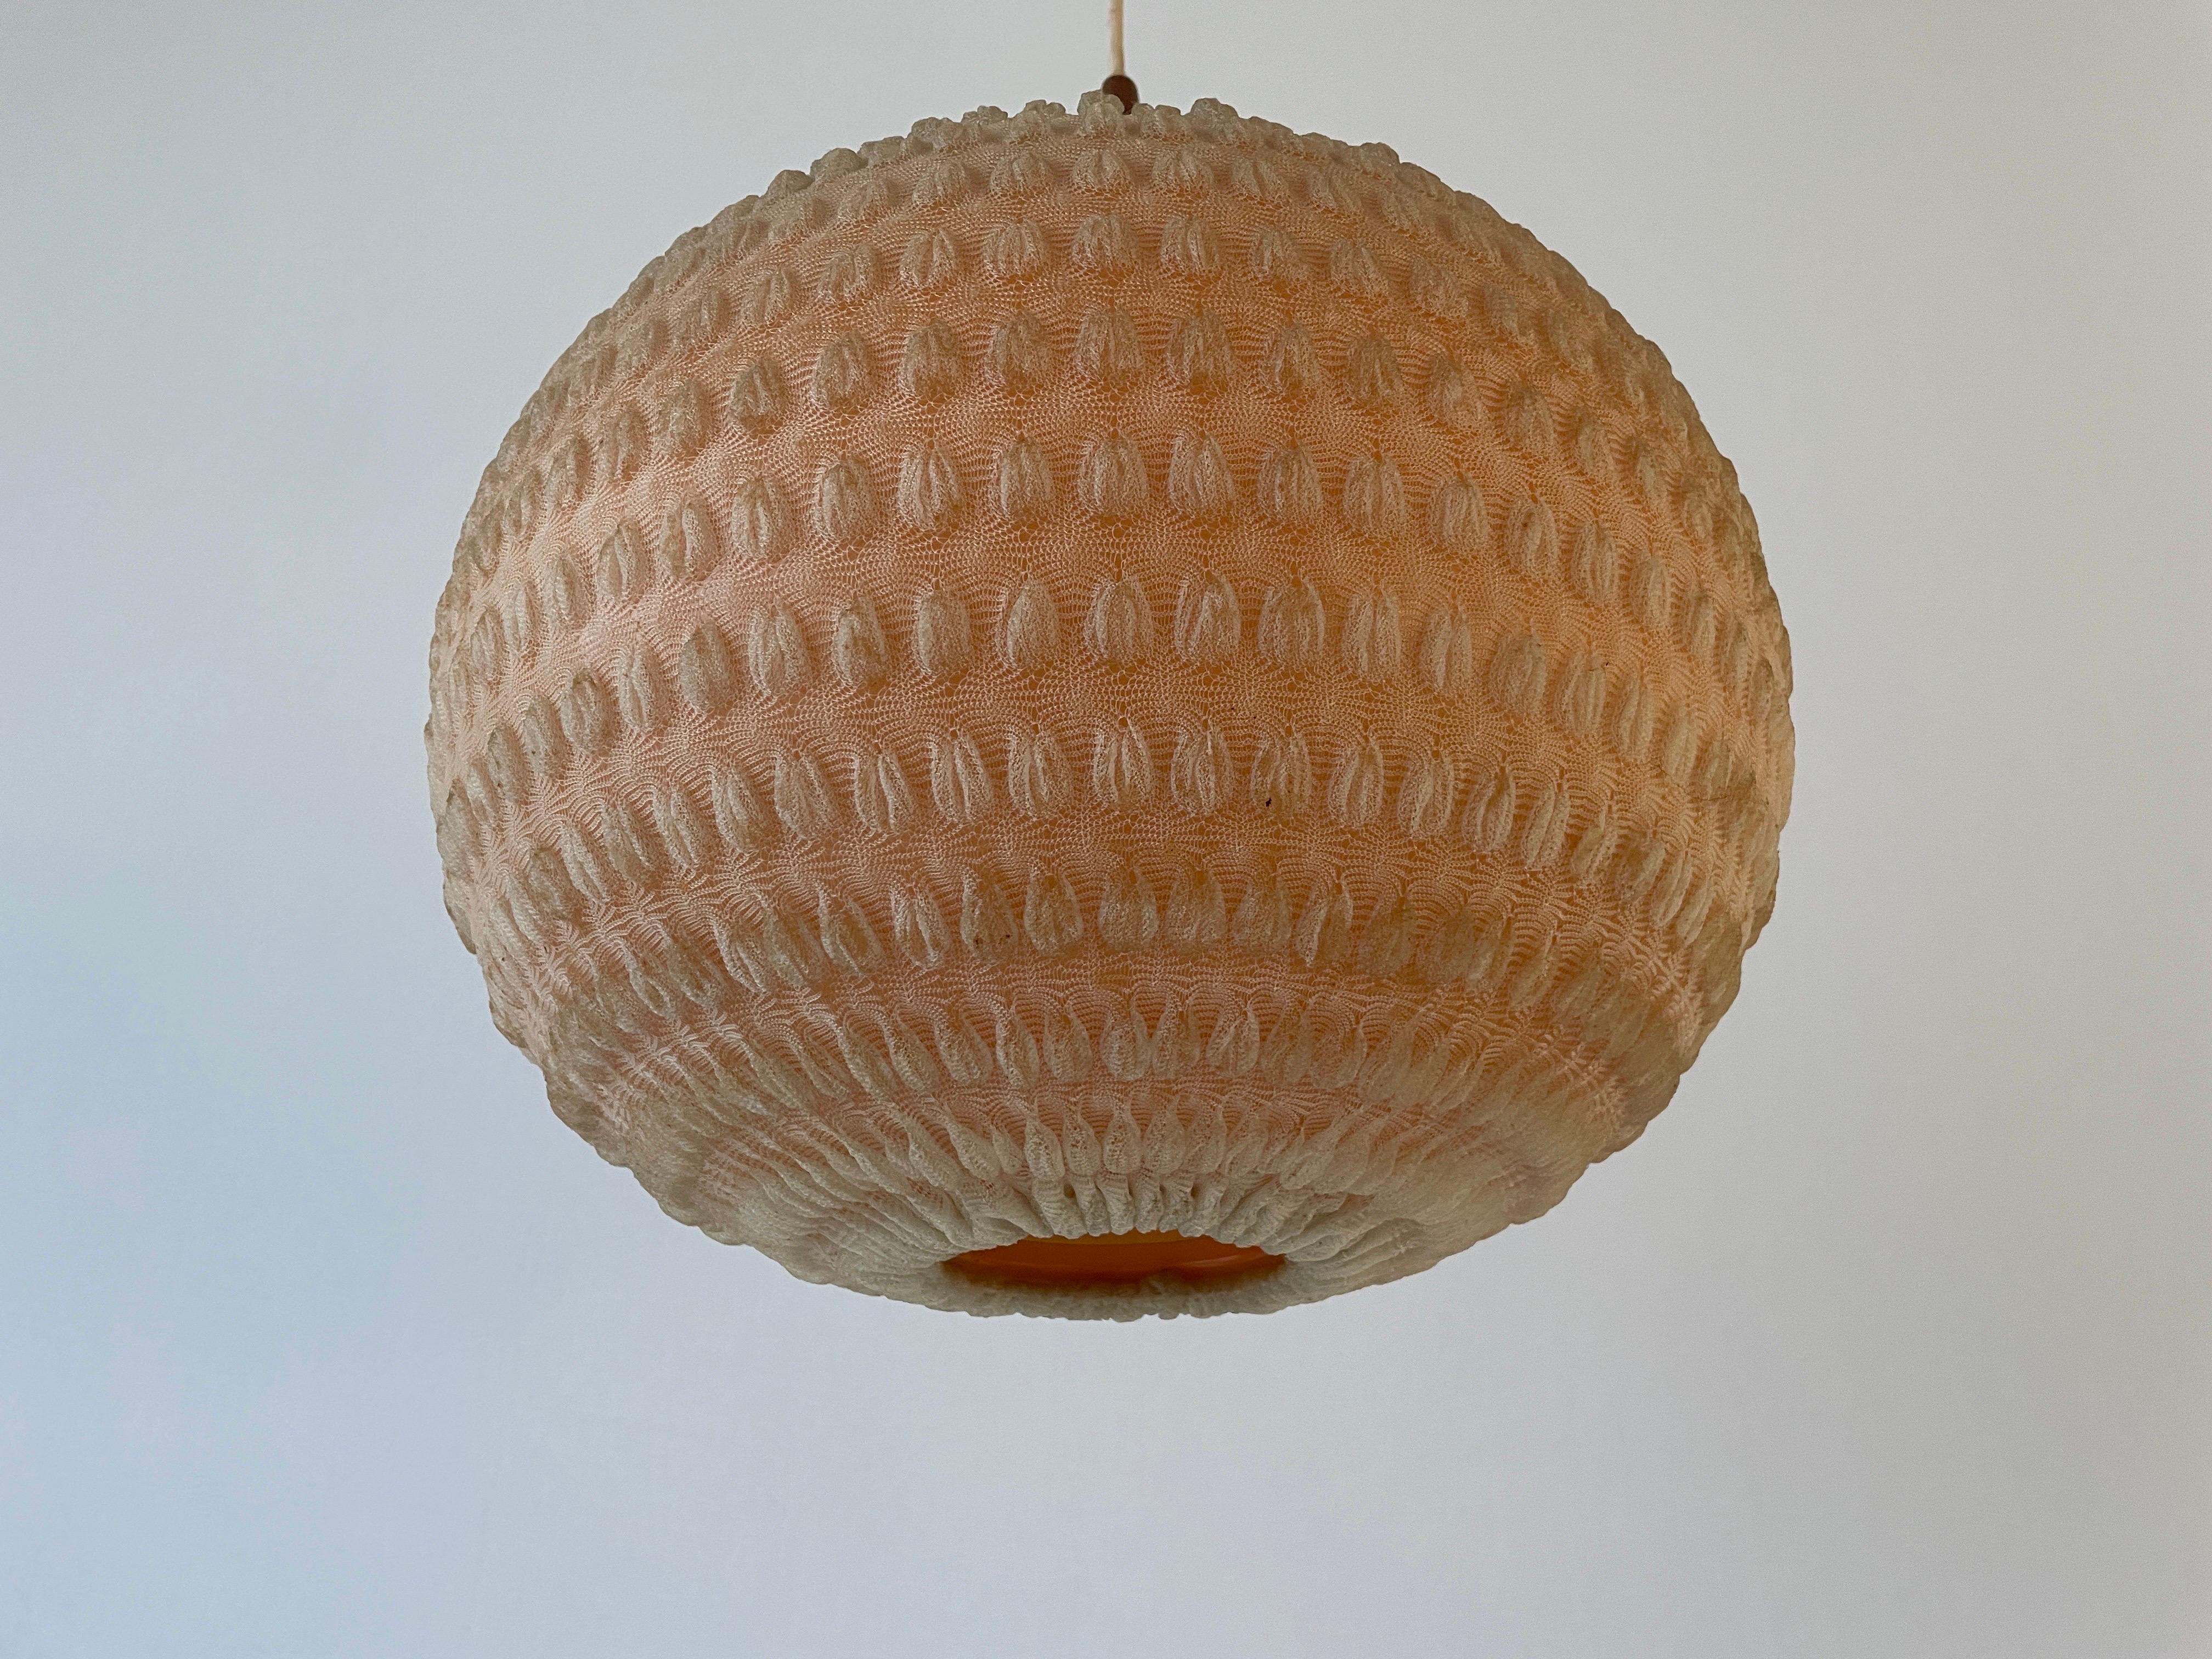 Teak & Ball Fabric Shade Ceiling Lamp by Temde, 1960s, Germany

Elegant and minimal design hanging lamp

Lampshade is in good condition and very clean. 
This lamp works with E27 light bulb. 
Wired and suitable to use with 220V and 110V for all